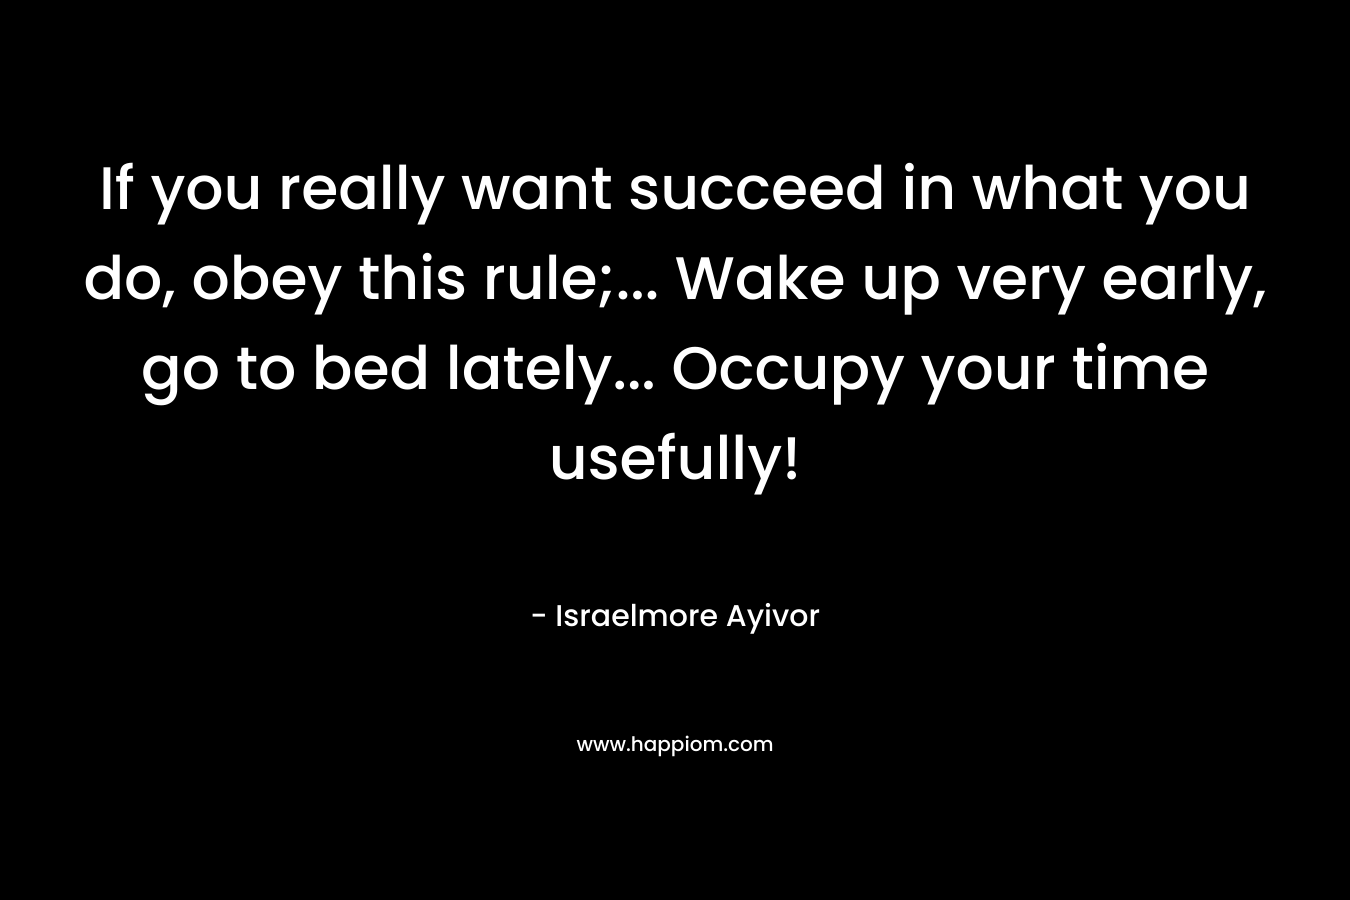 If you really want succeed in what you do, obey this rule;… Wake up very early, go to bed lately… Occupy your time usefully! – Israelmore Ayivor